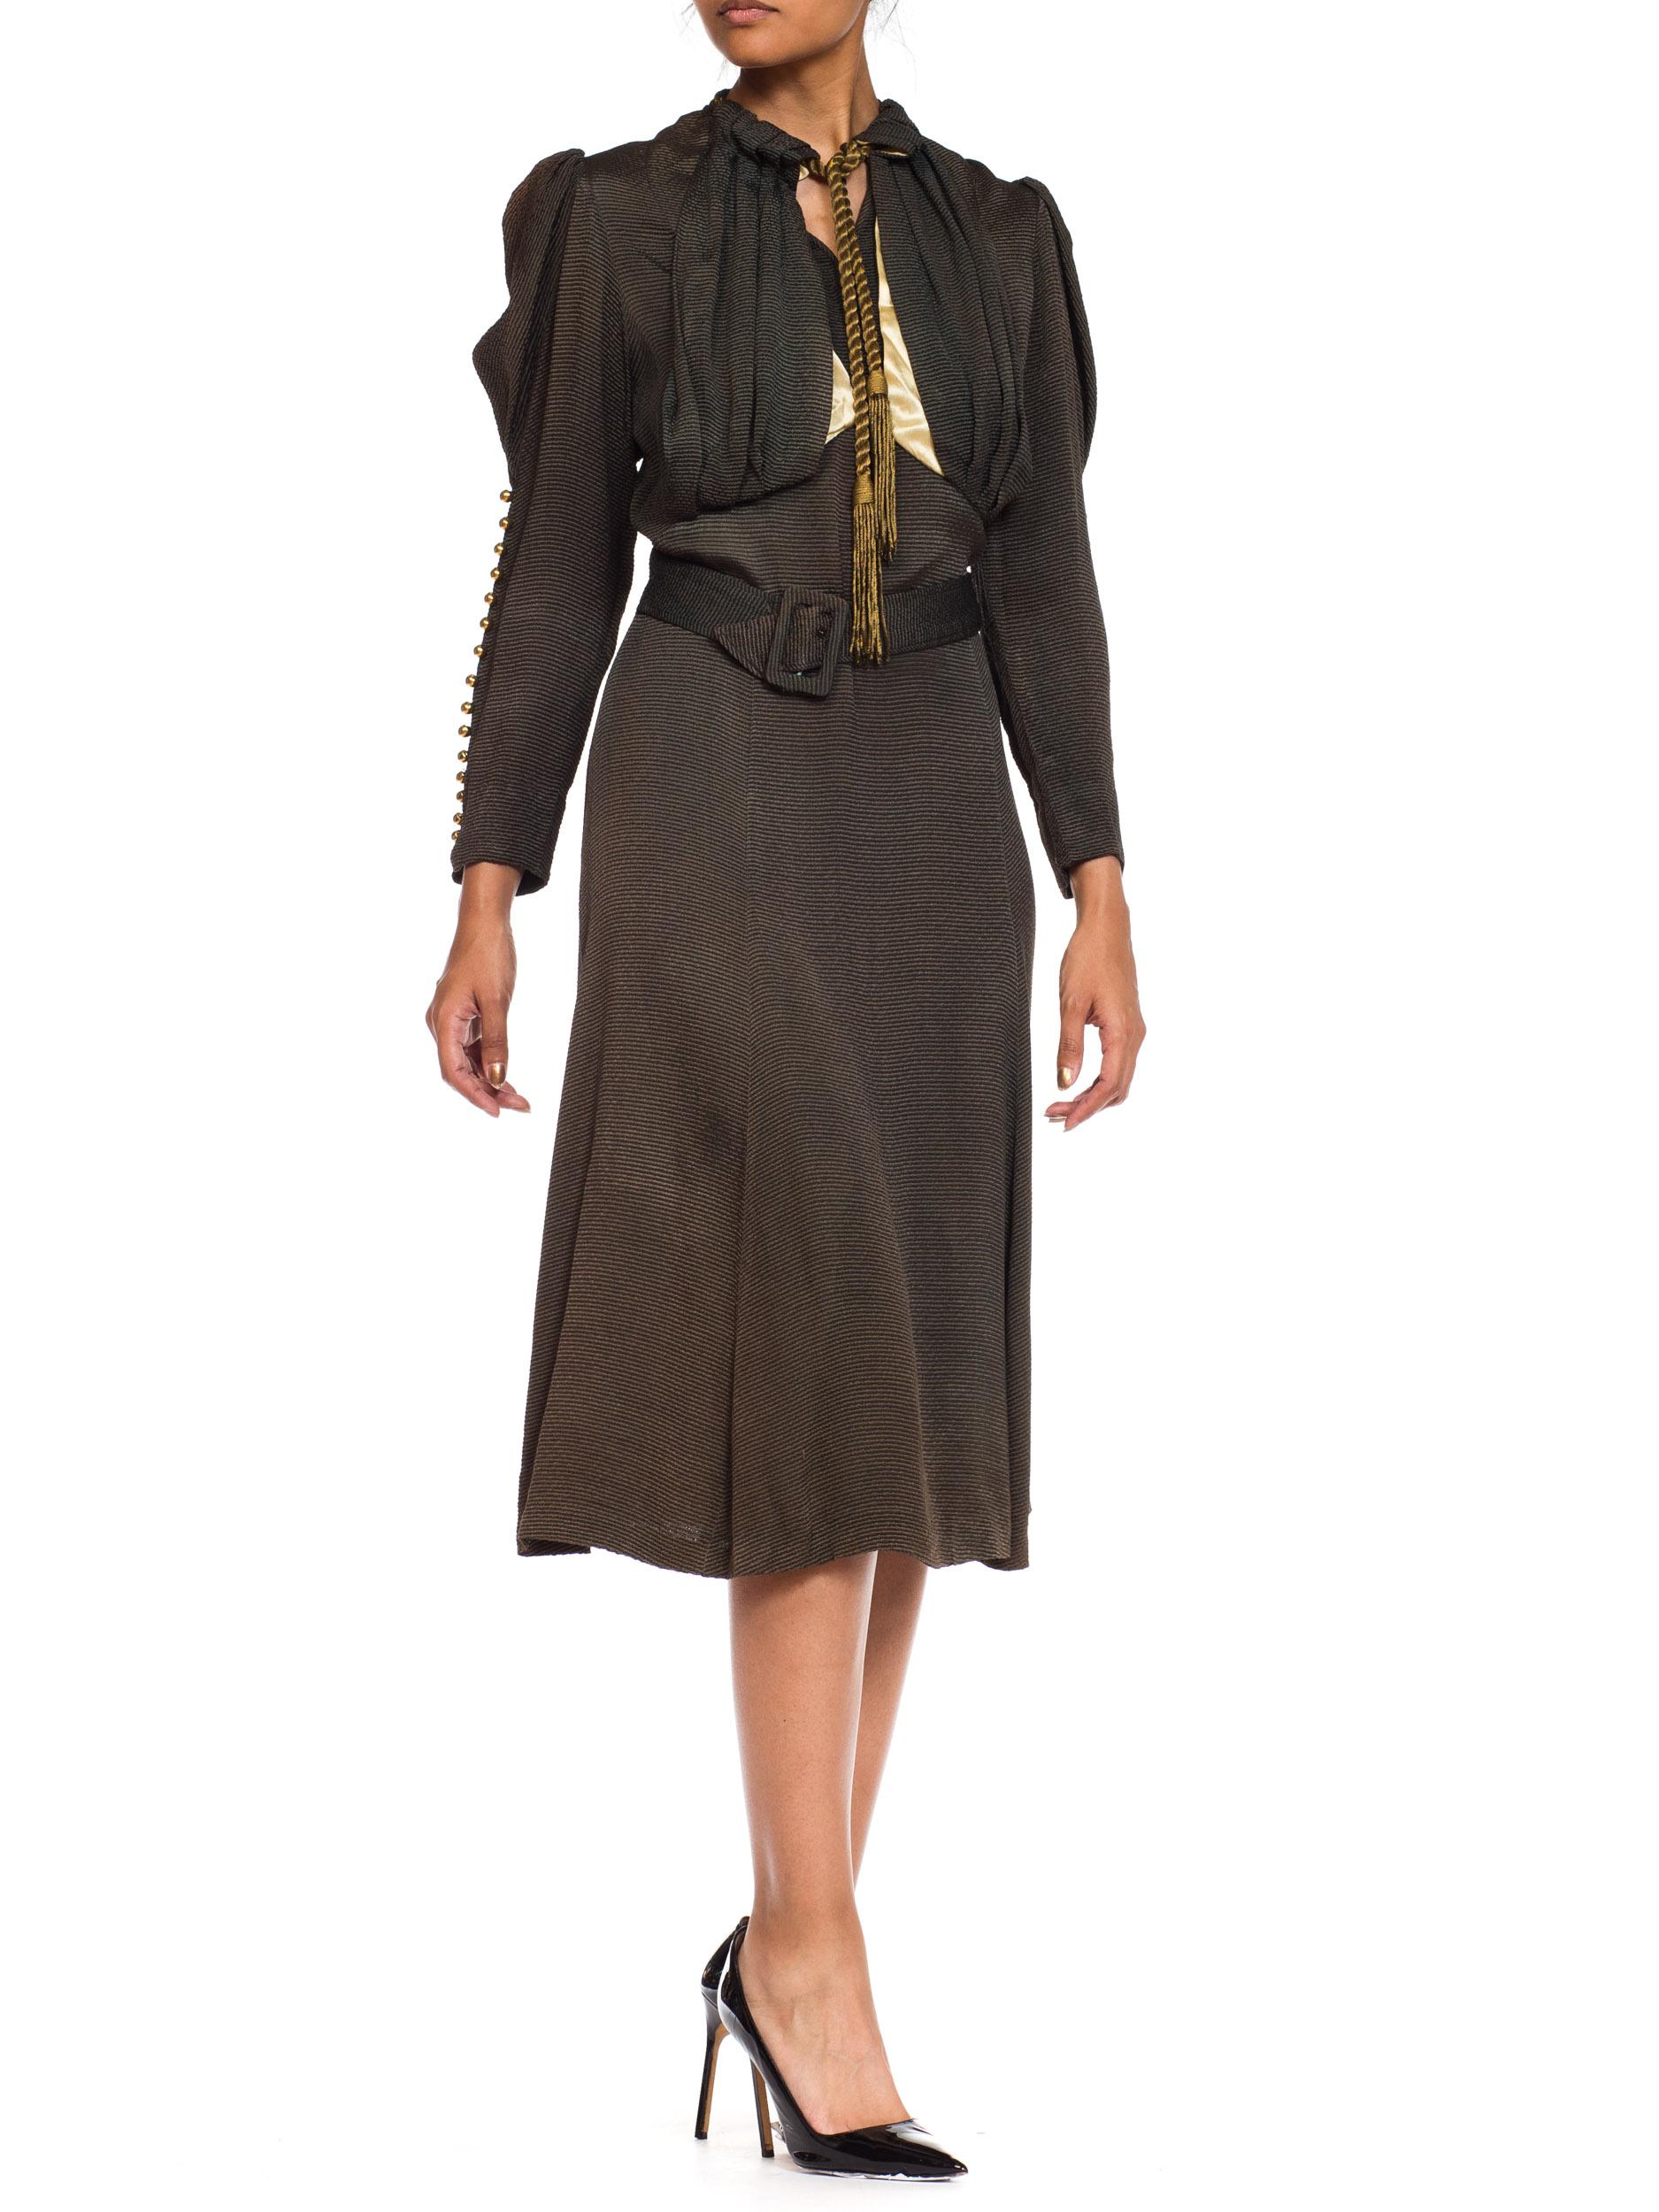 1930s Olive Green Textured Mutton Sleeve Dress 3